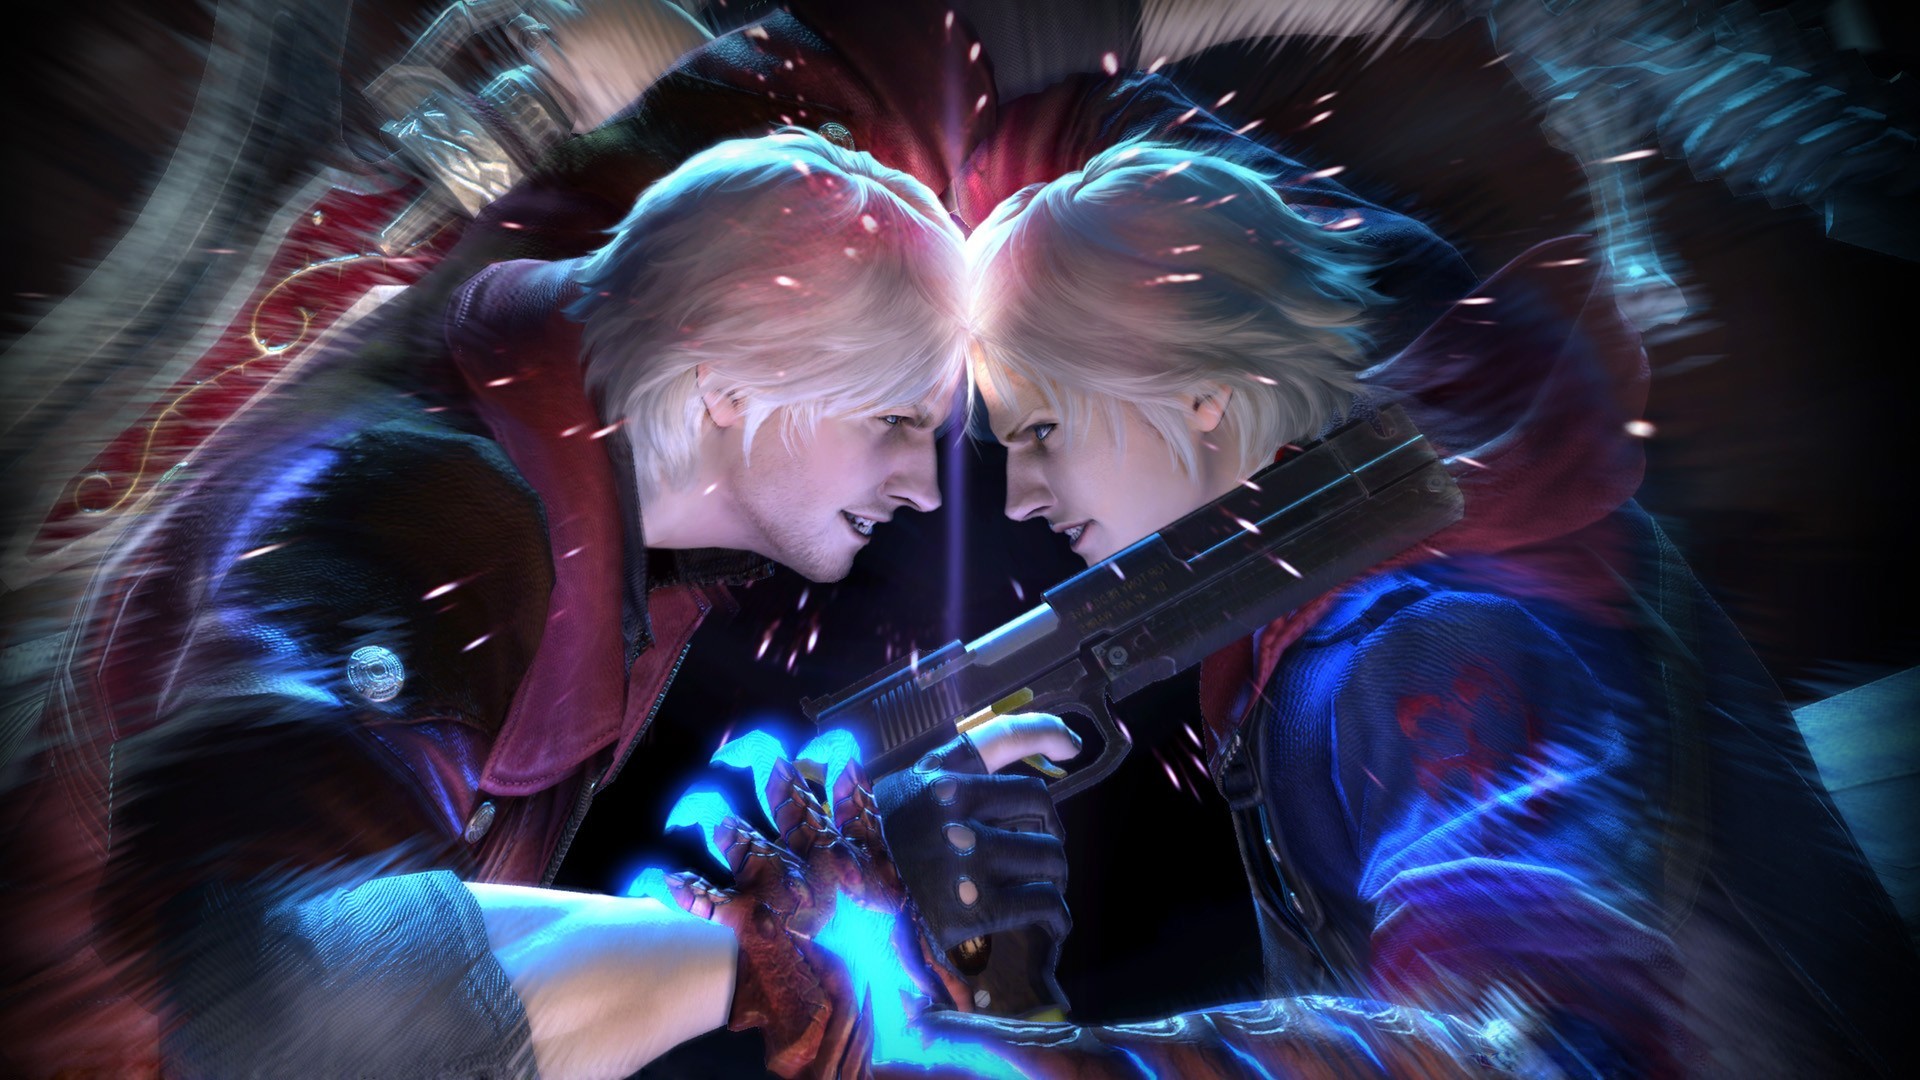 “Devil May Cry 4” & “DmC” Coming to PS4/XBO